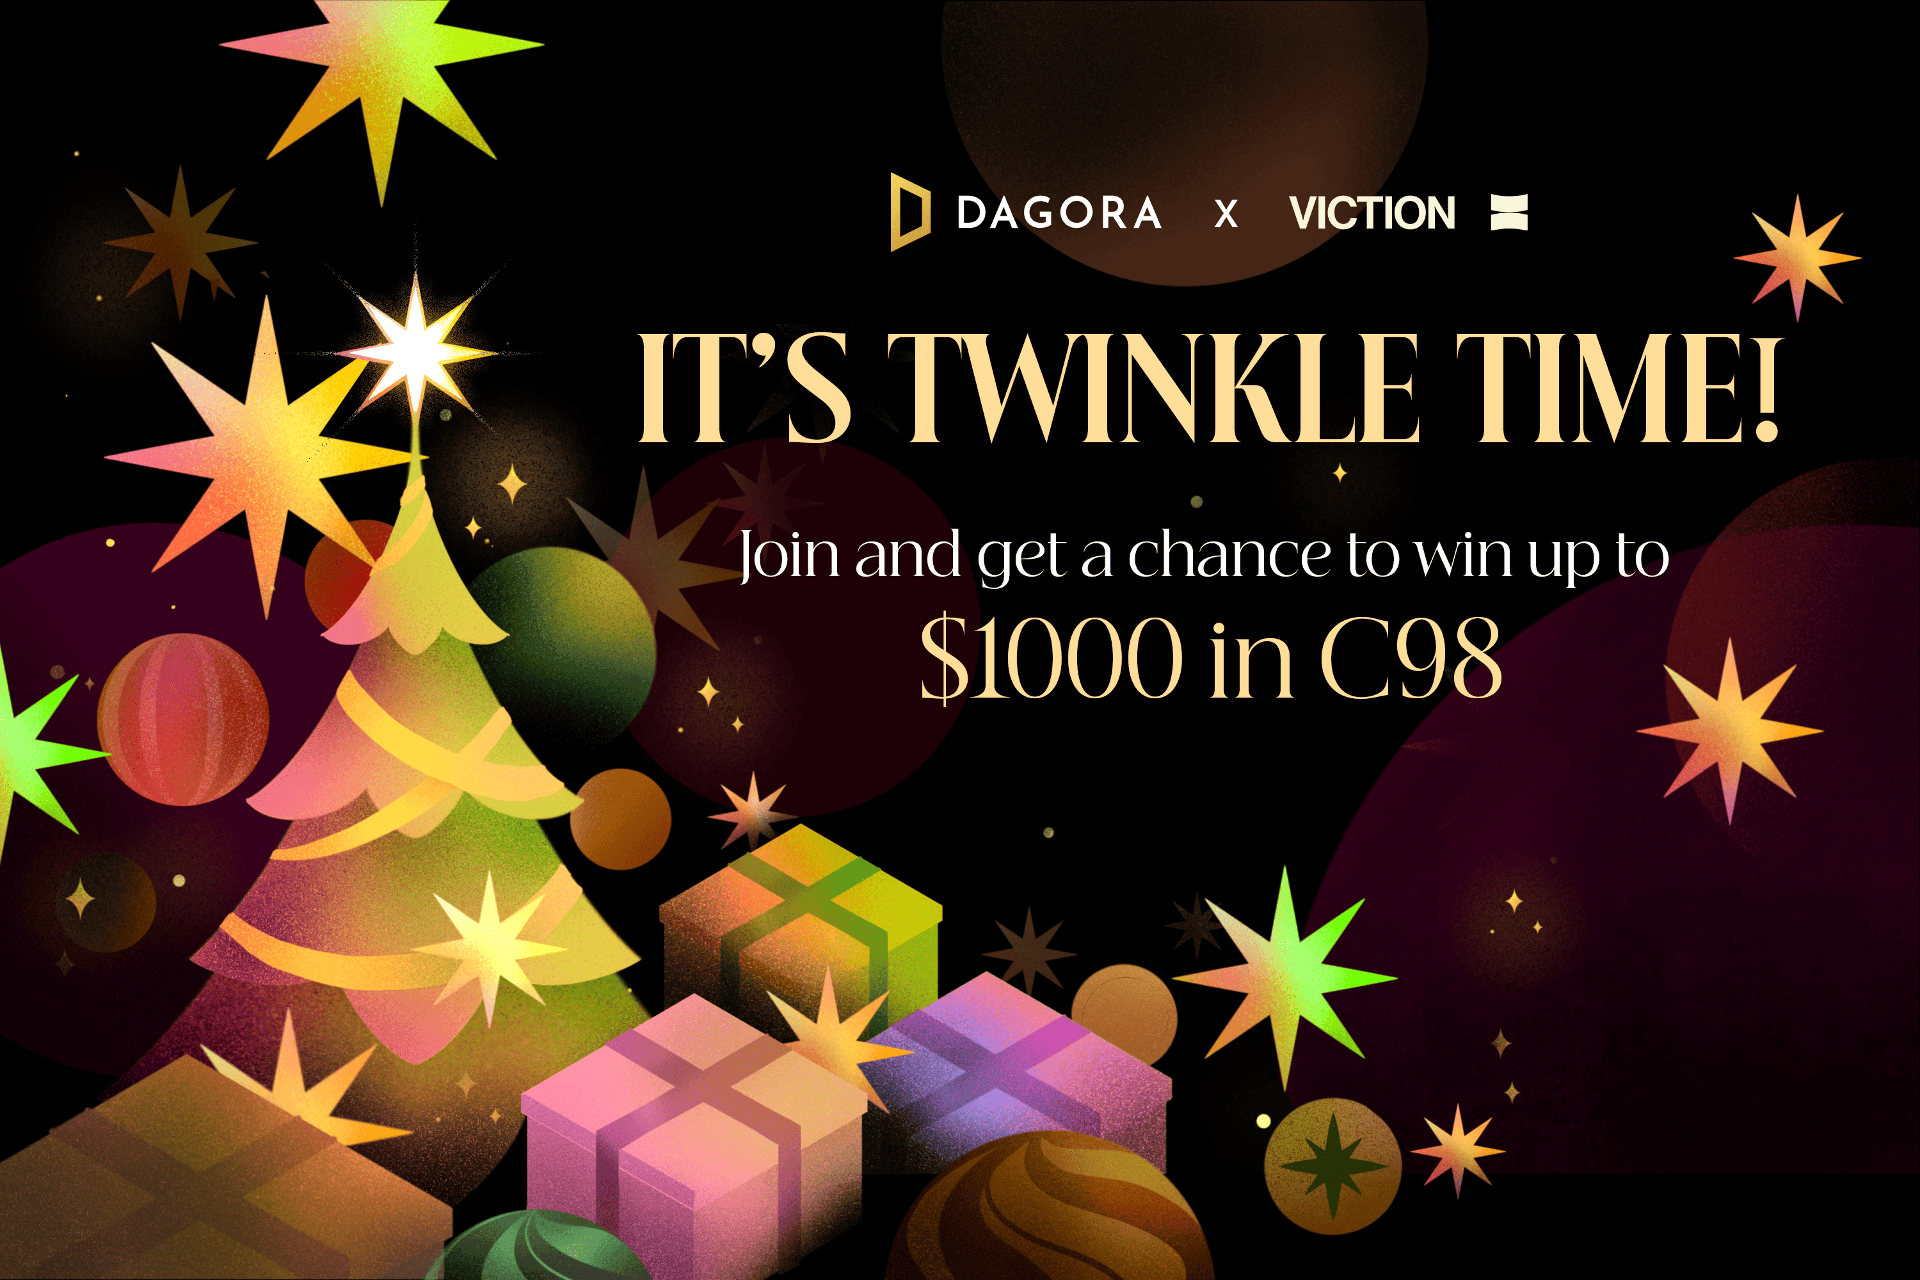 Unwrap the Christmas surprise totaling $1000 – It's Twinkle Time!